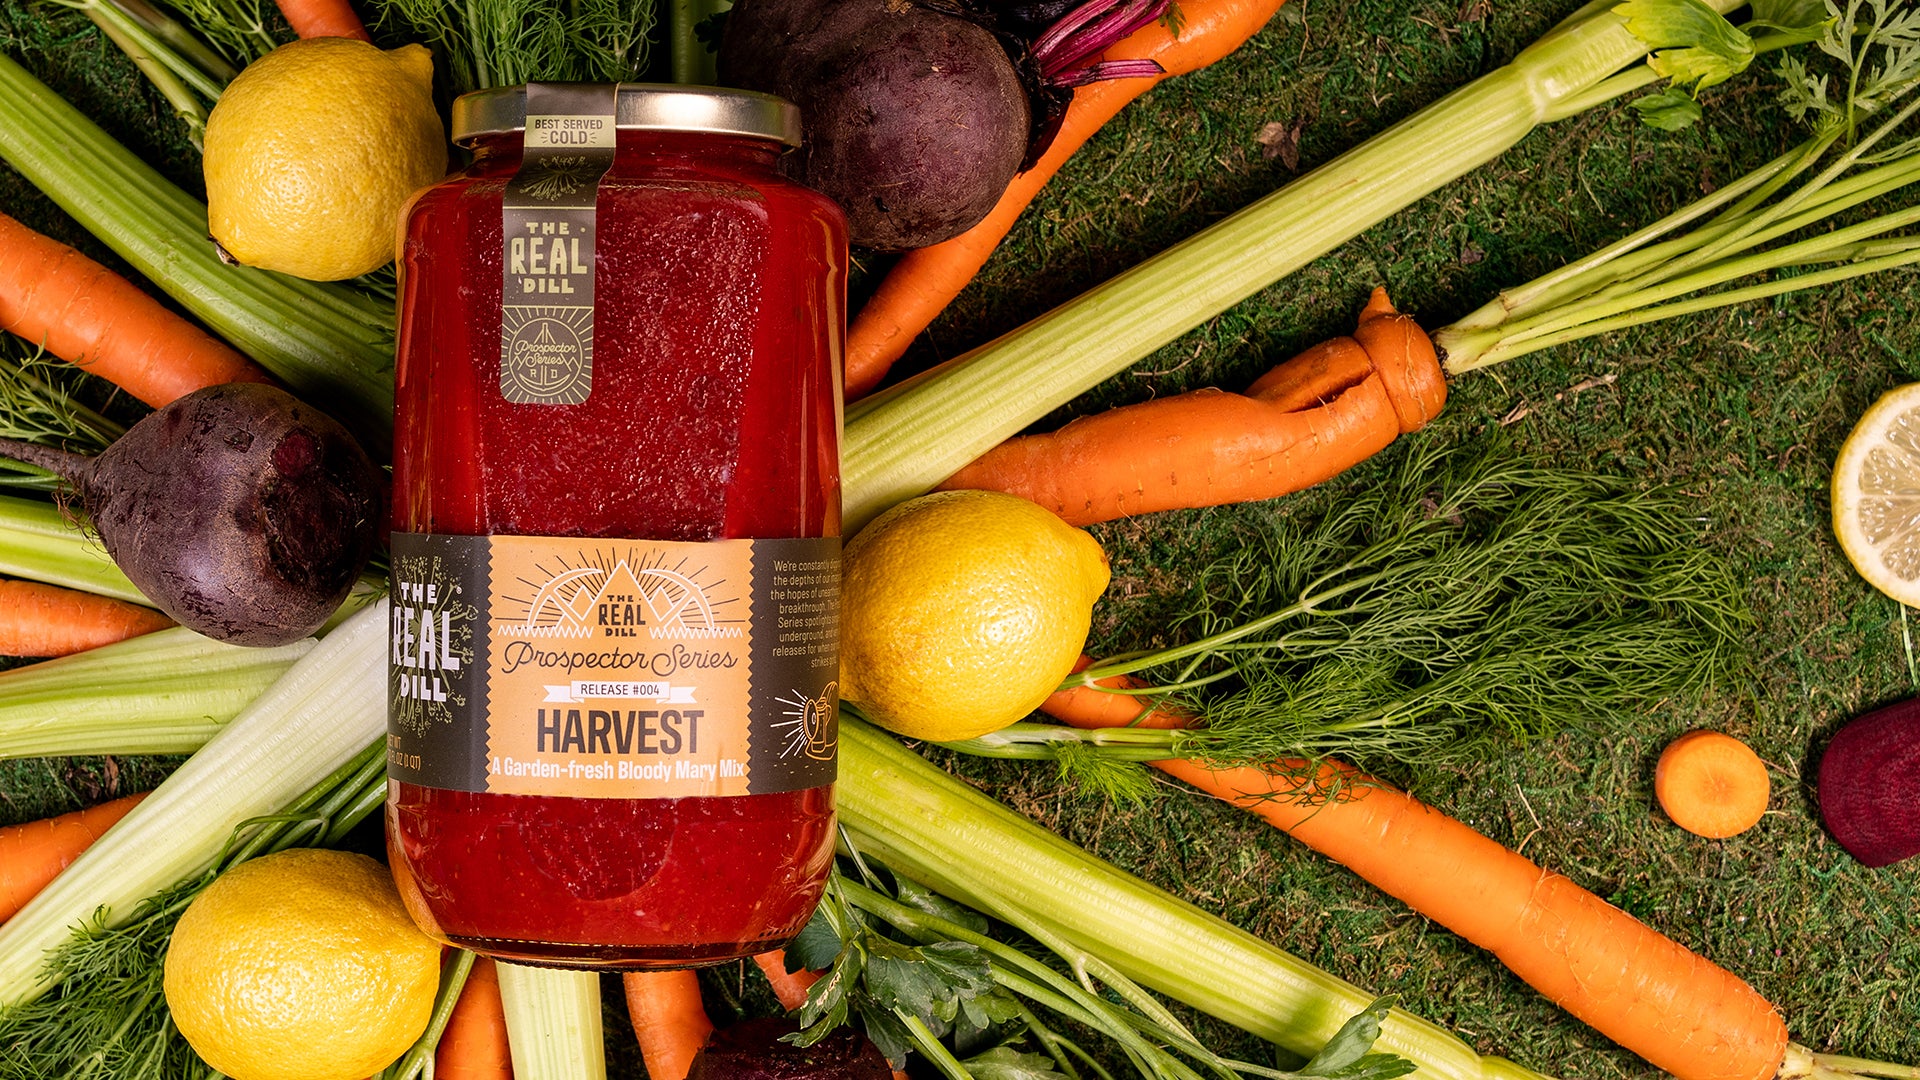 Strike Gold: The Prospector Series Featuring Harvest Bloody Mary Mix